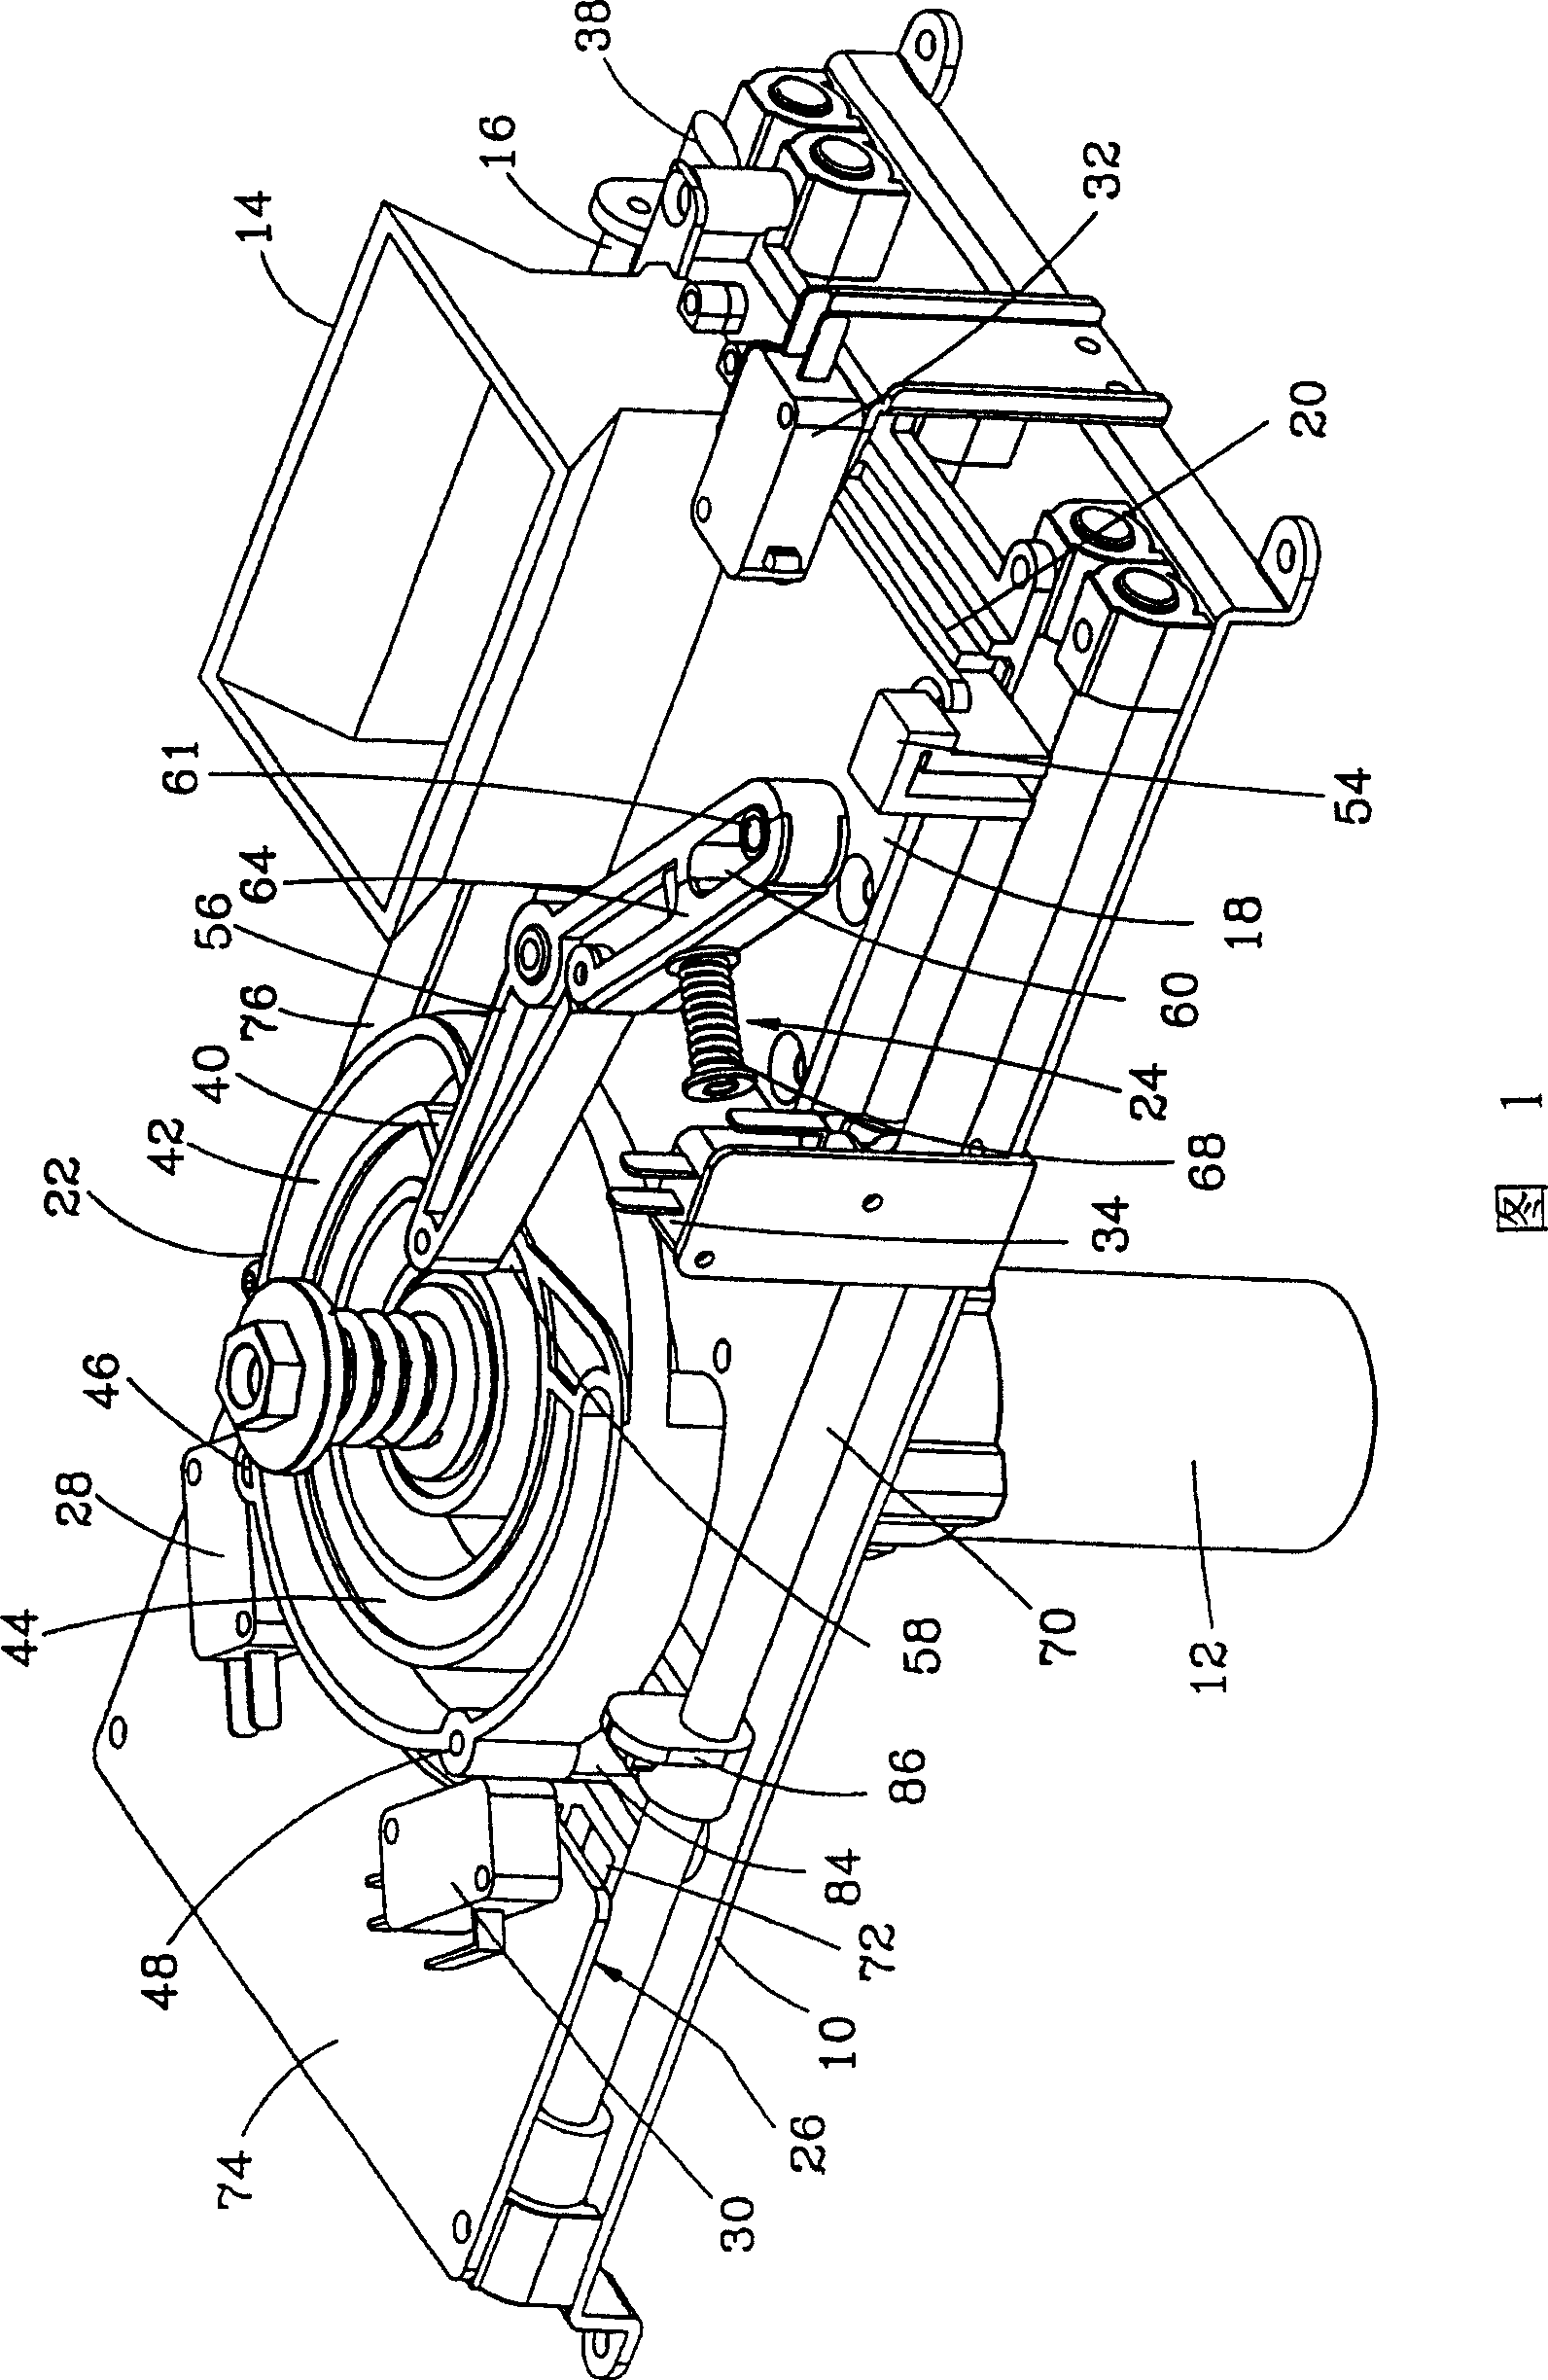 A method of extruding cut tobacco into cigarette pipes and a cut tobacco extruder thereof